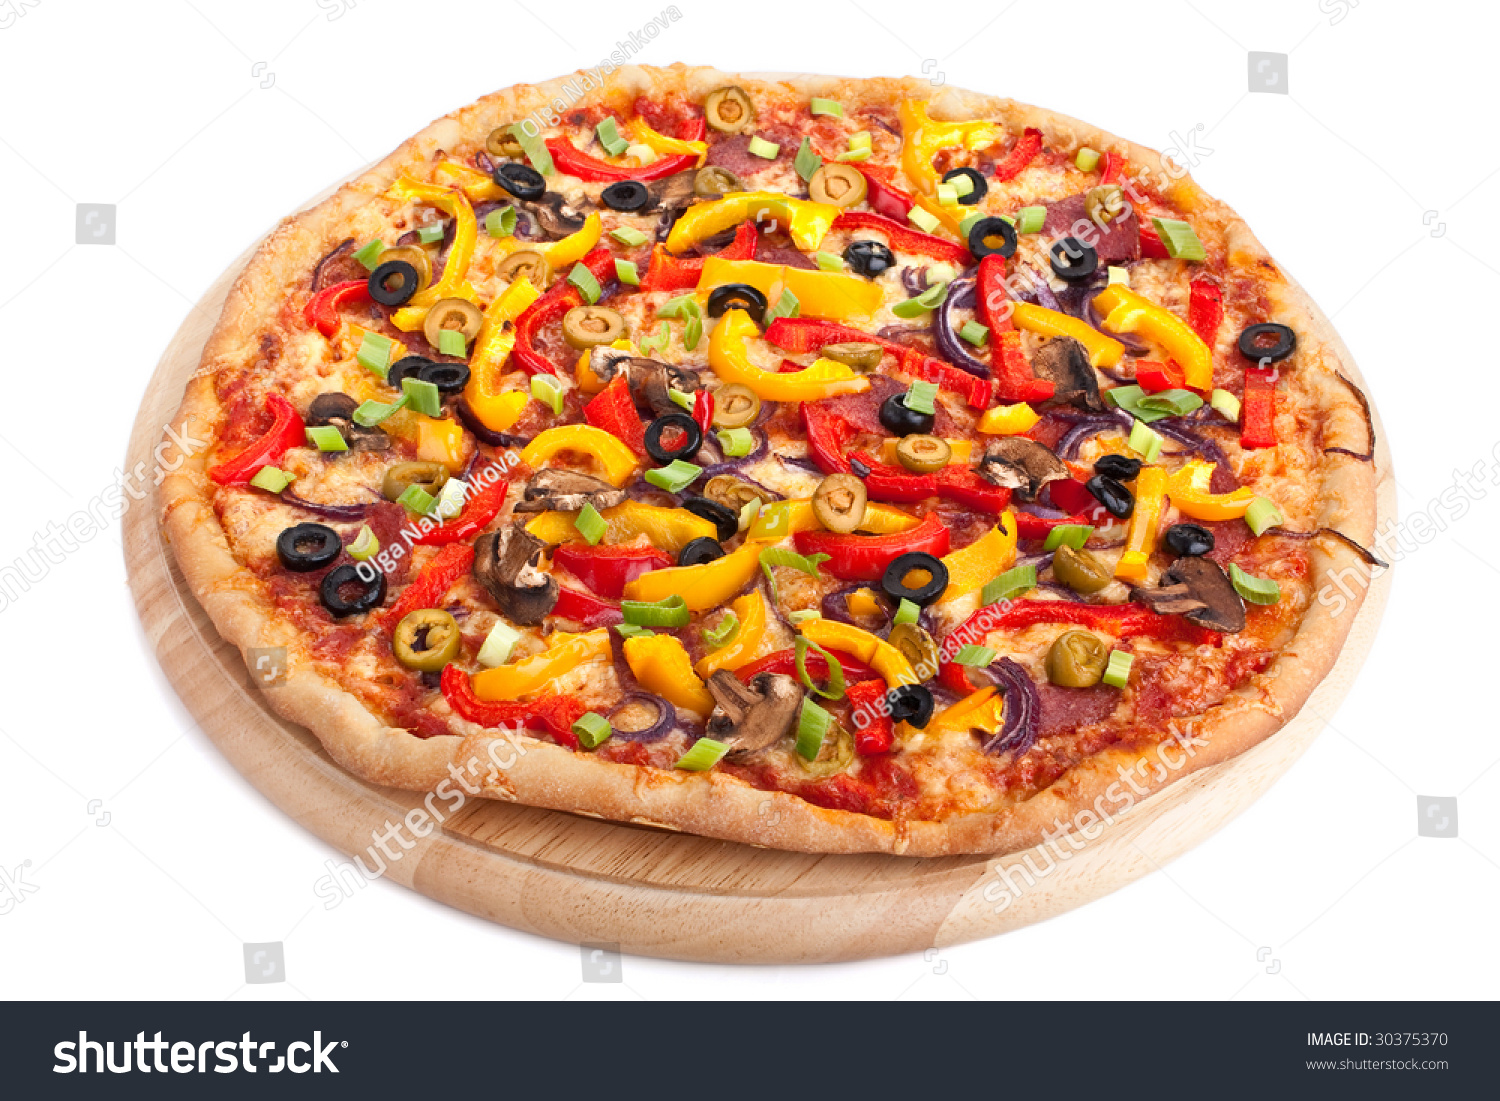 Colorful Vegetable Pizza On A Round Wooden Chopping Board Stock Photo ...